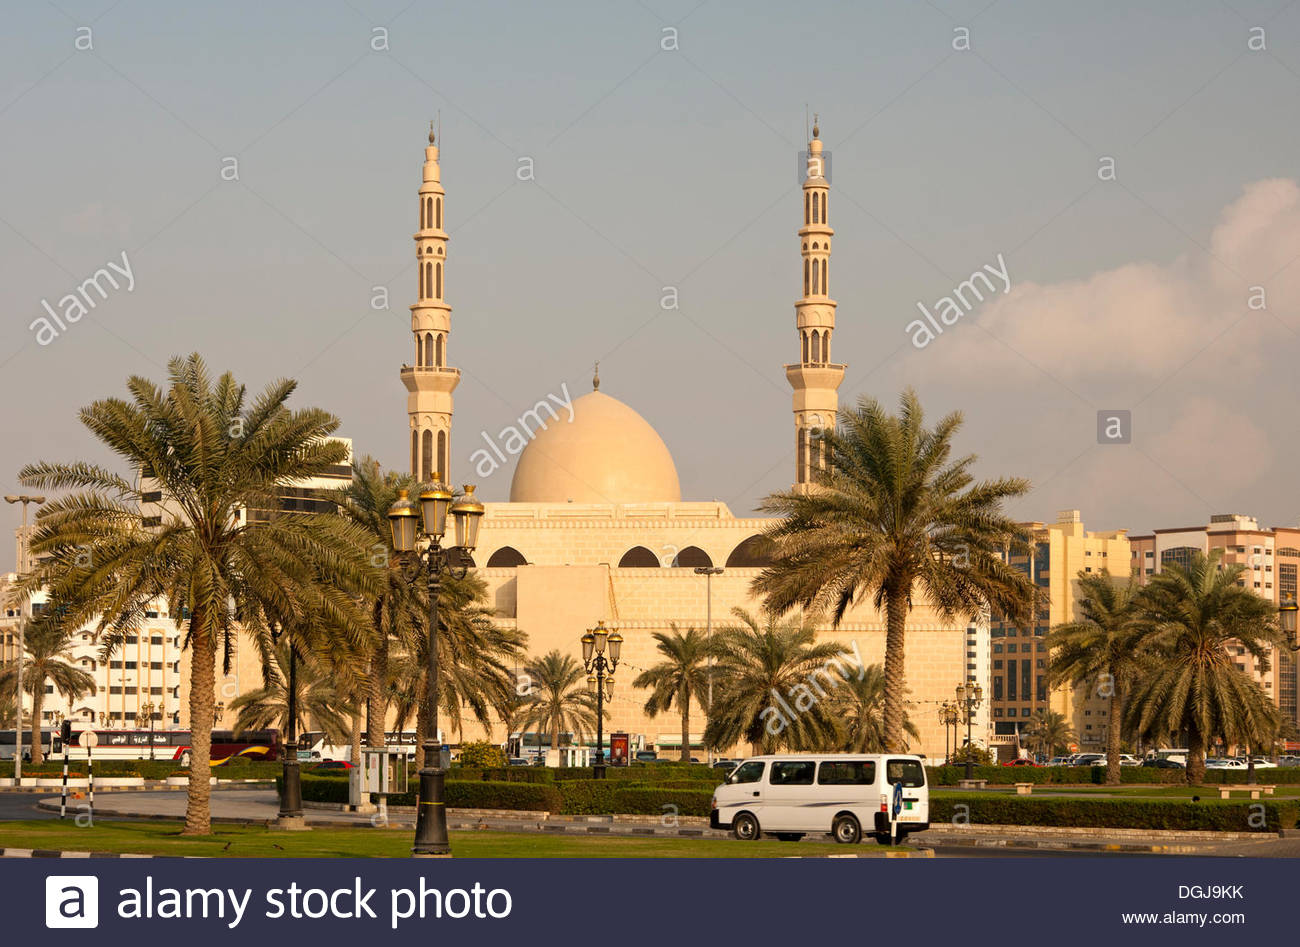 HQ Mosque Of Two Minarets Wallpapers | File 193.19Kb